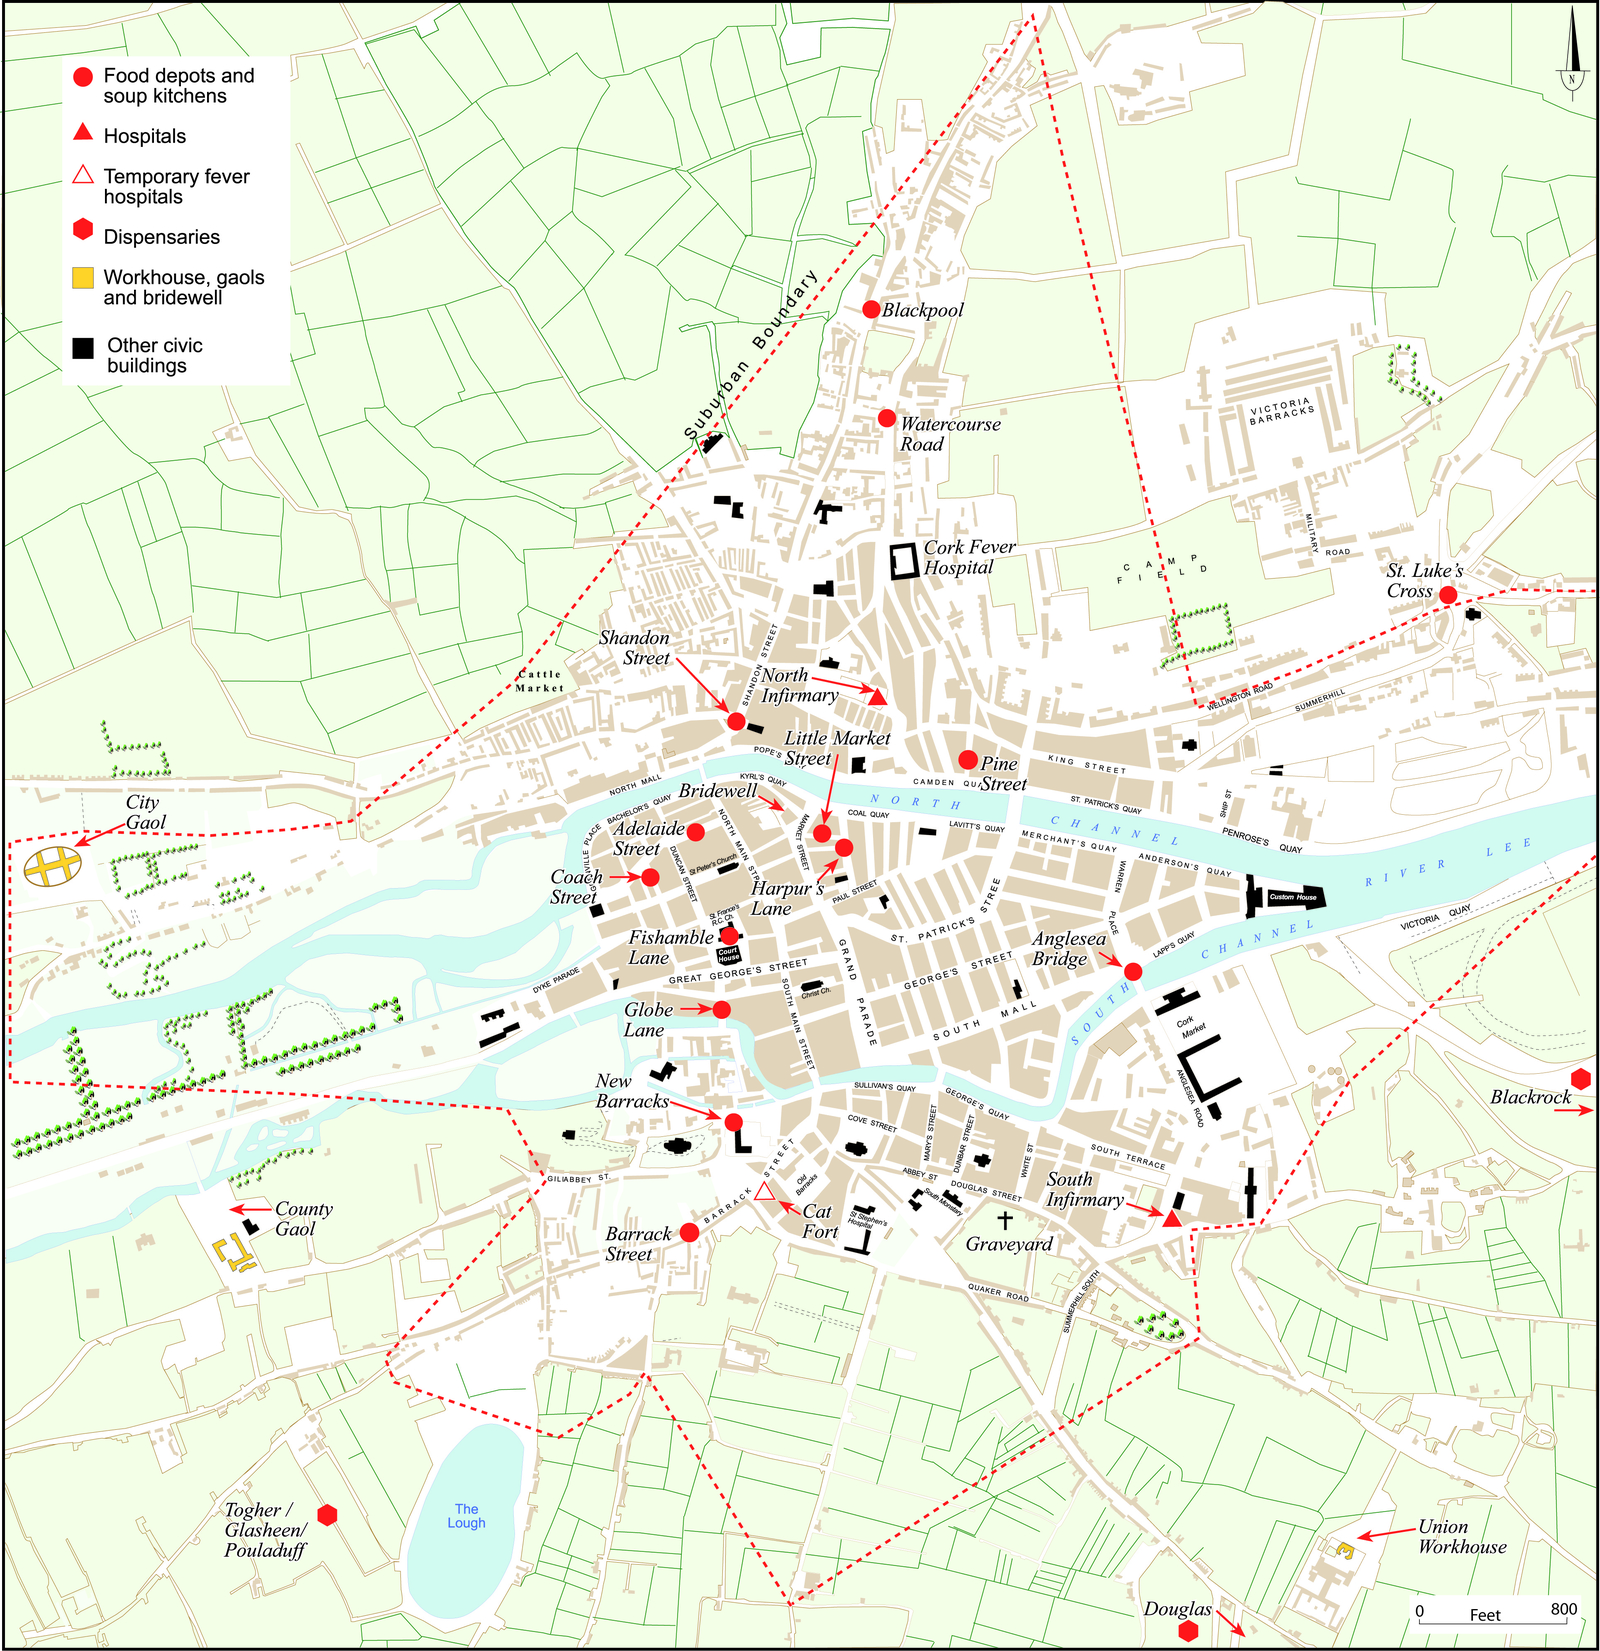 Image - Location of medical and relief facilities and burial grounds in Cork City during the Famine. Map taken from the Atlas of the Great Irish Famine edited by John Crowley, William J. Smyth and Mike Murphy